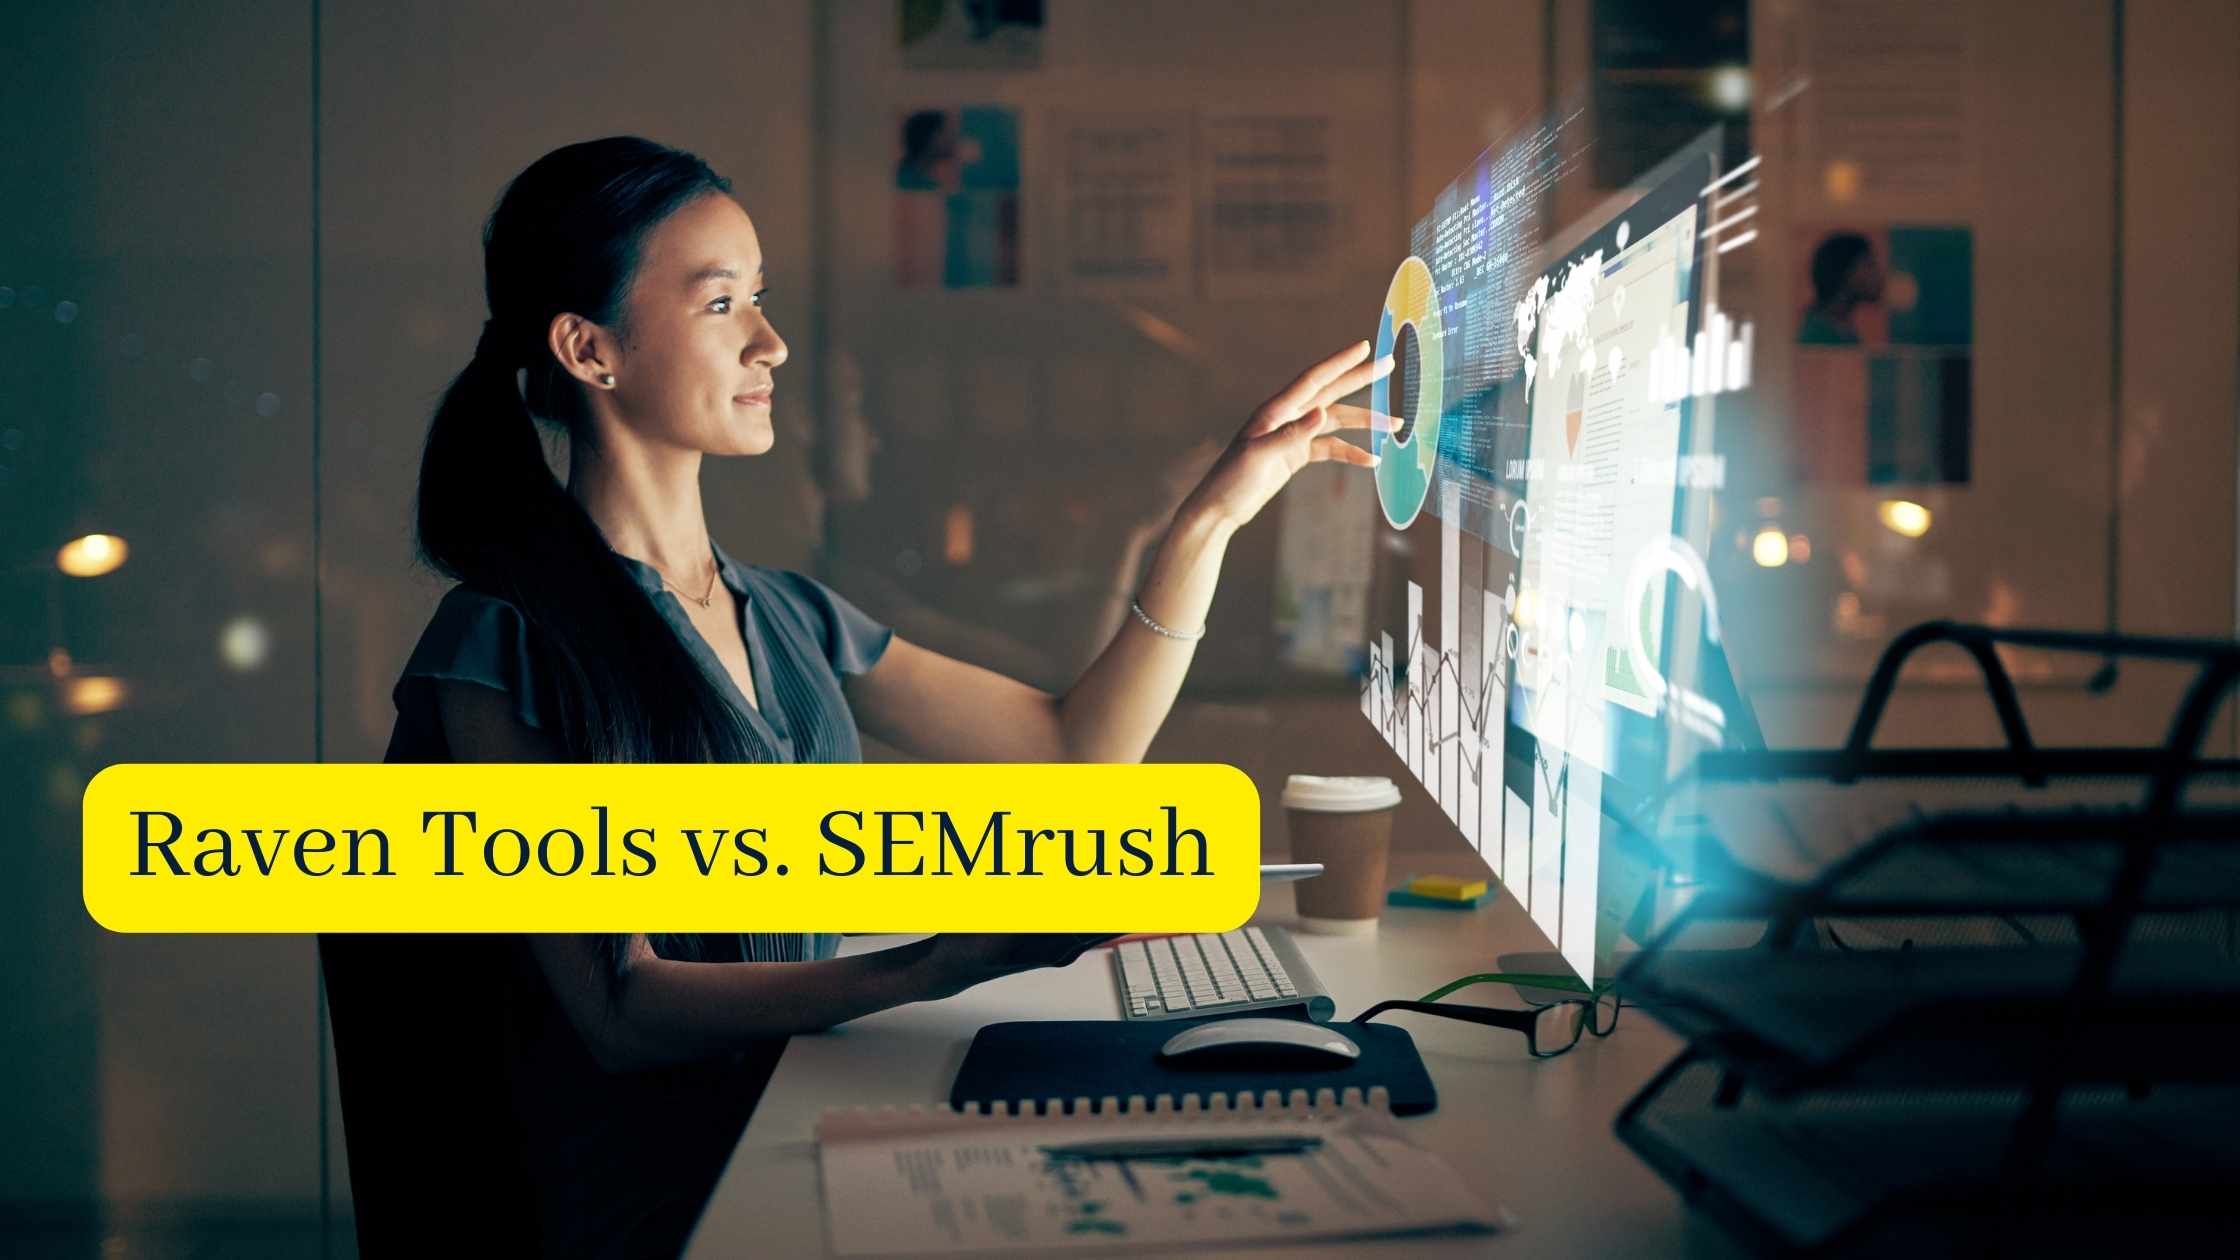 When you look at the effectiveness of Raven Tools Vs, Semrush, you will realize the differences.